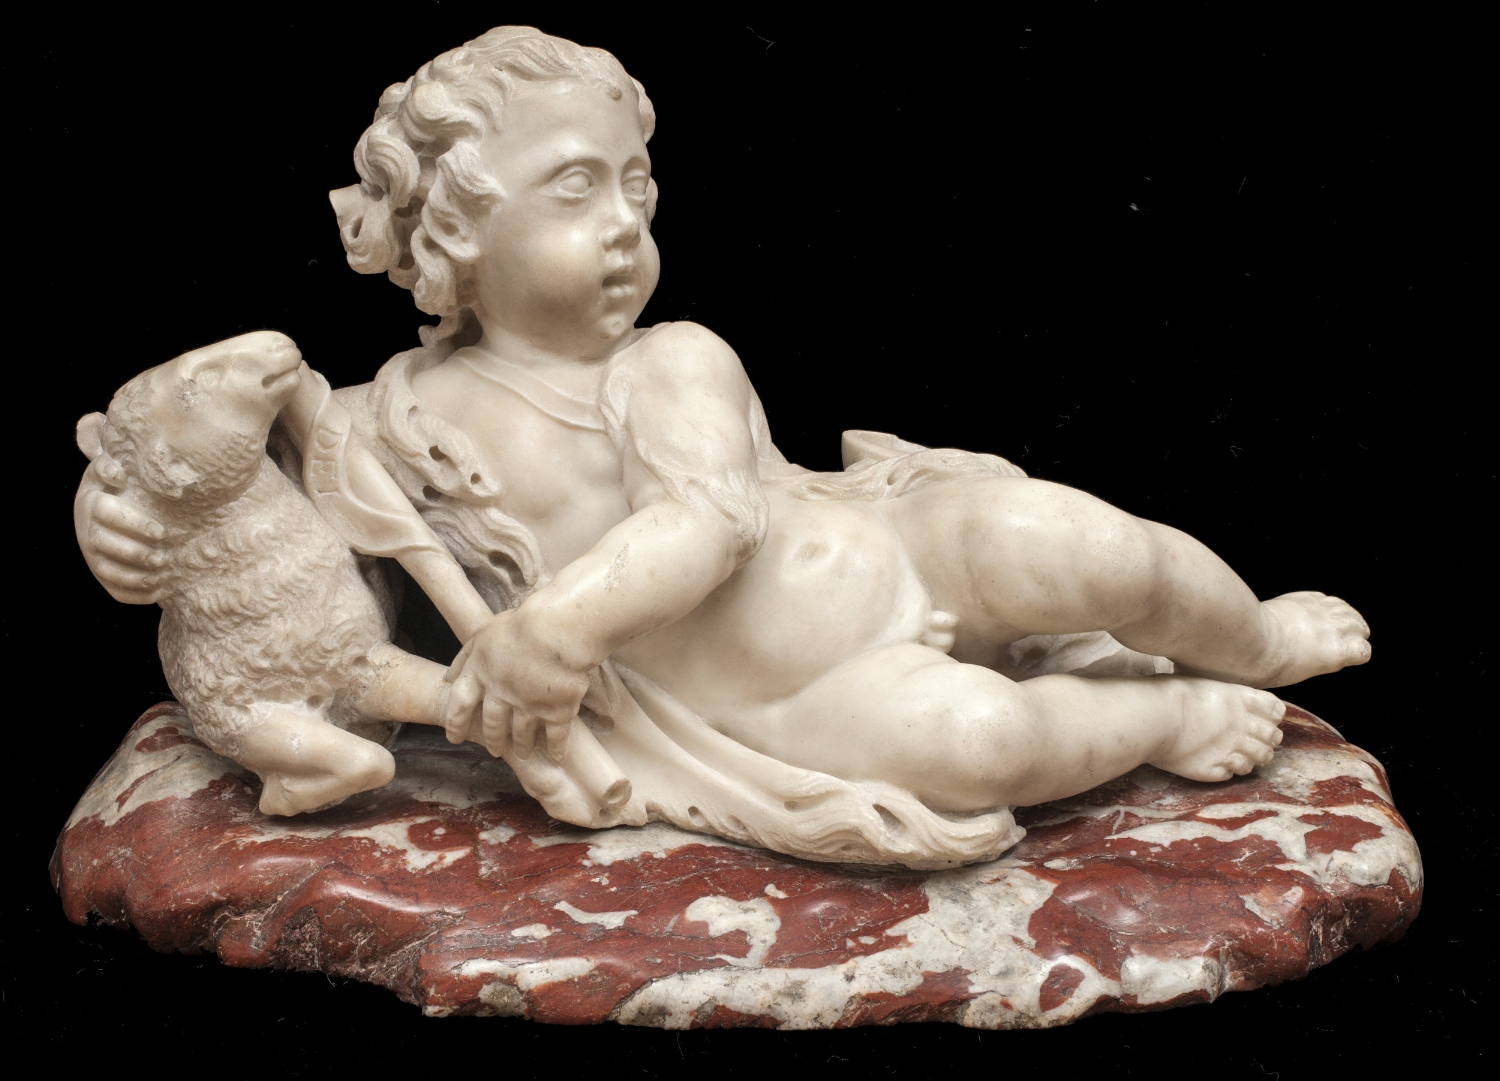 Attributed to Giusto le Court, The Infant St. John the Baptist with a Lamb - View from the Front